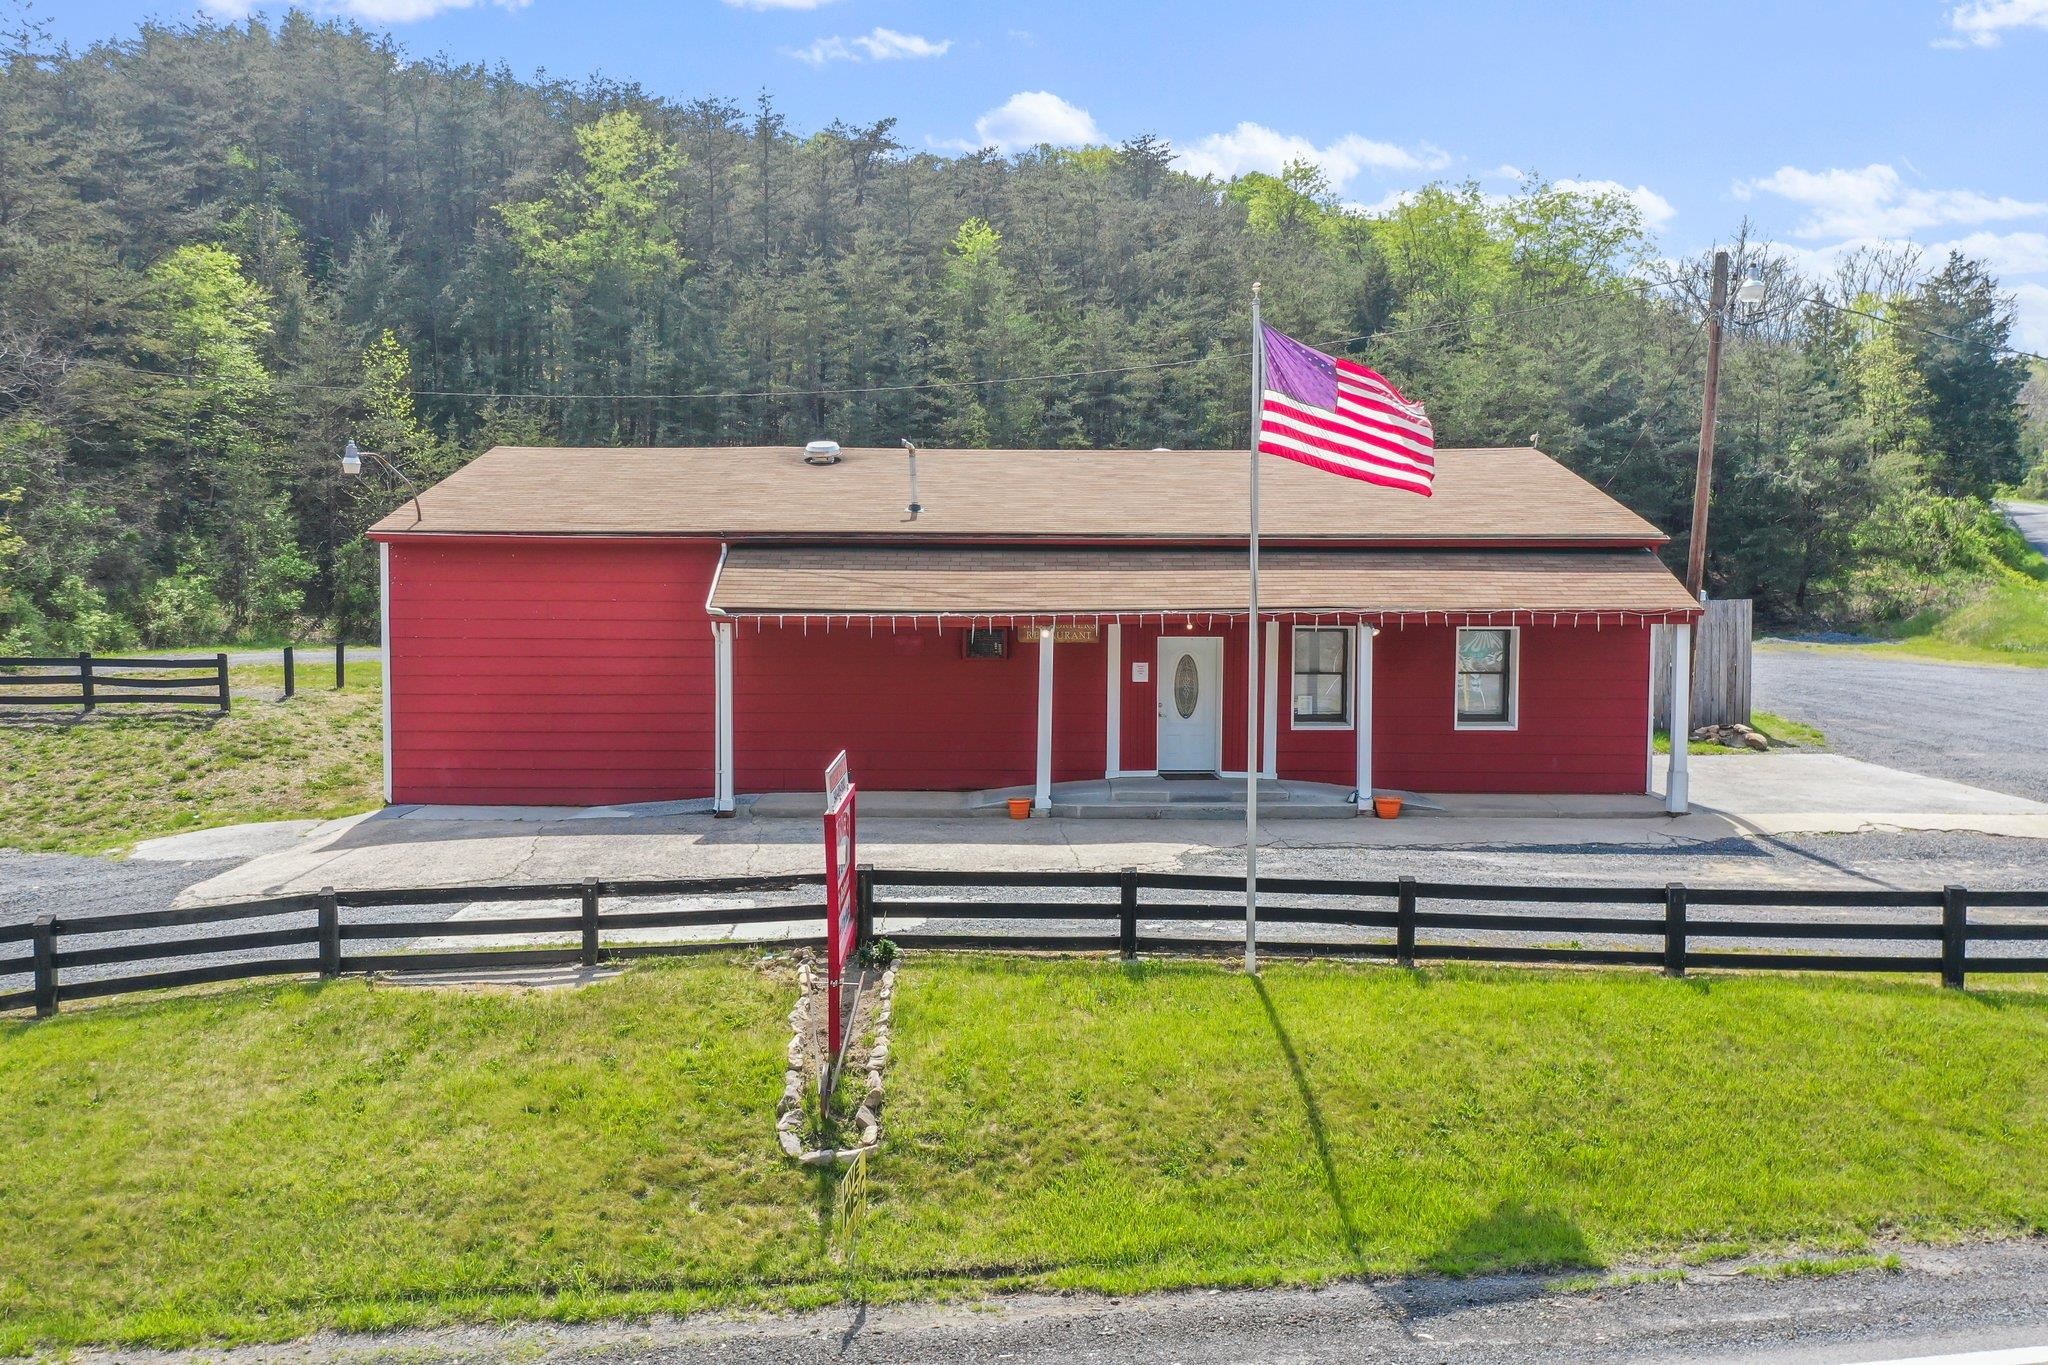 1429 S PIFER RD, STAR TANNERY, Virginia 22654, ,Commercial,1429 S PIFER RD,647949 MLS # 647949